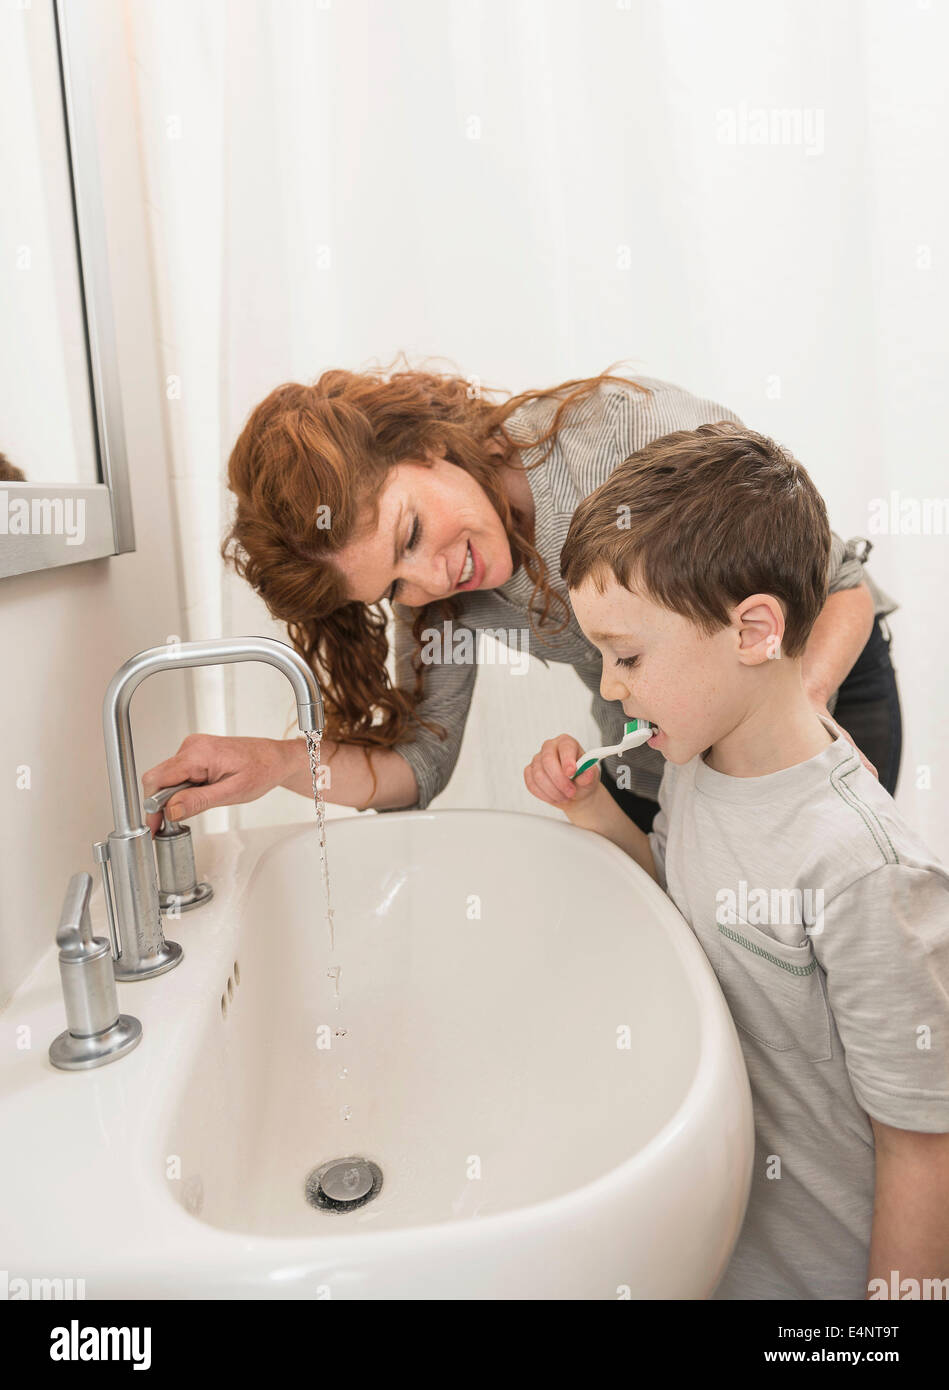 Son (6-7) and mother brushing teeth Stock Photo